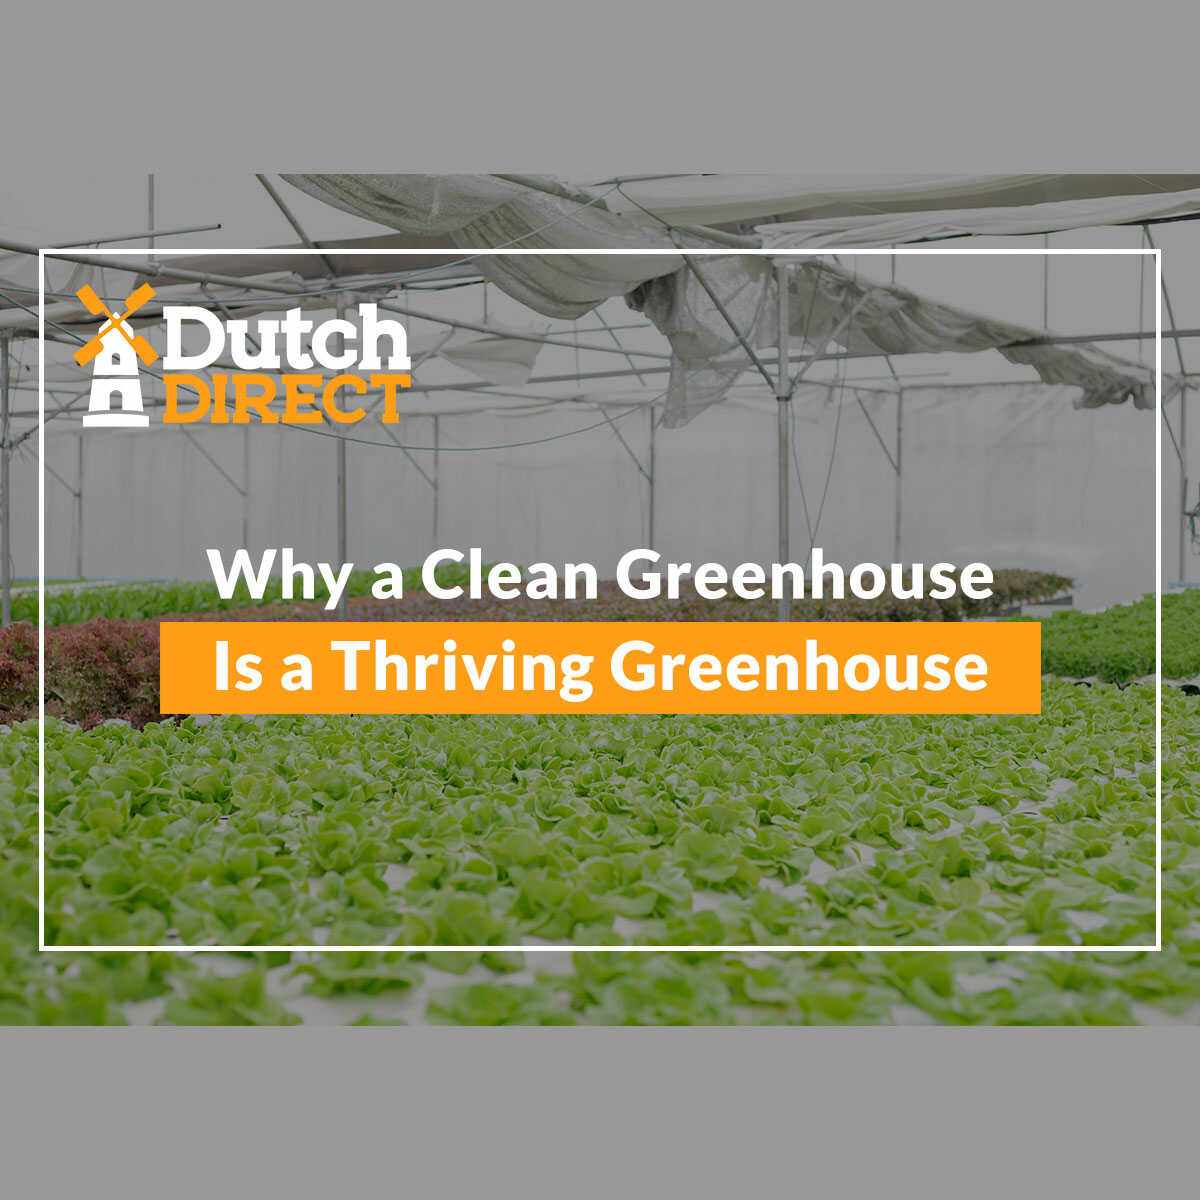 Why a Clean Greenhouse Is a Thriving Greenhouse